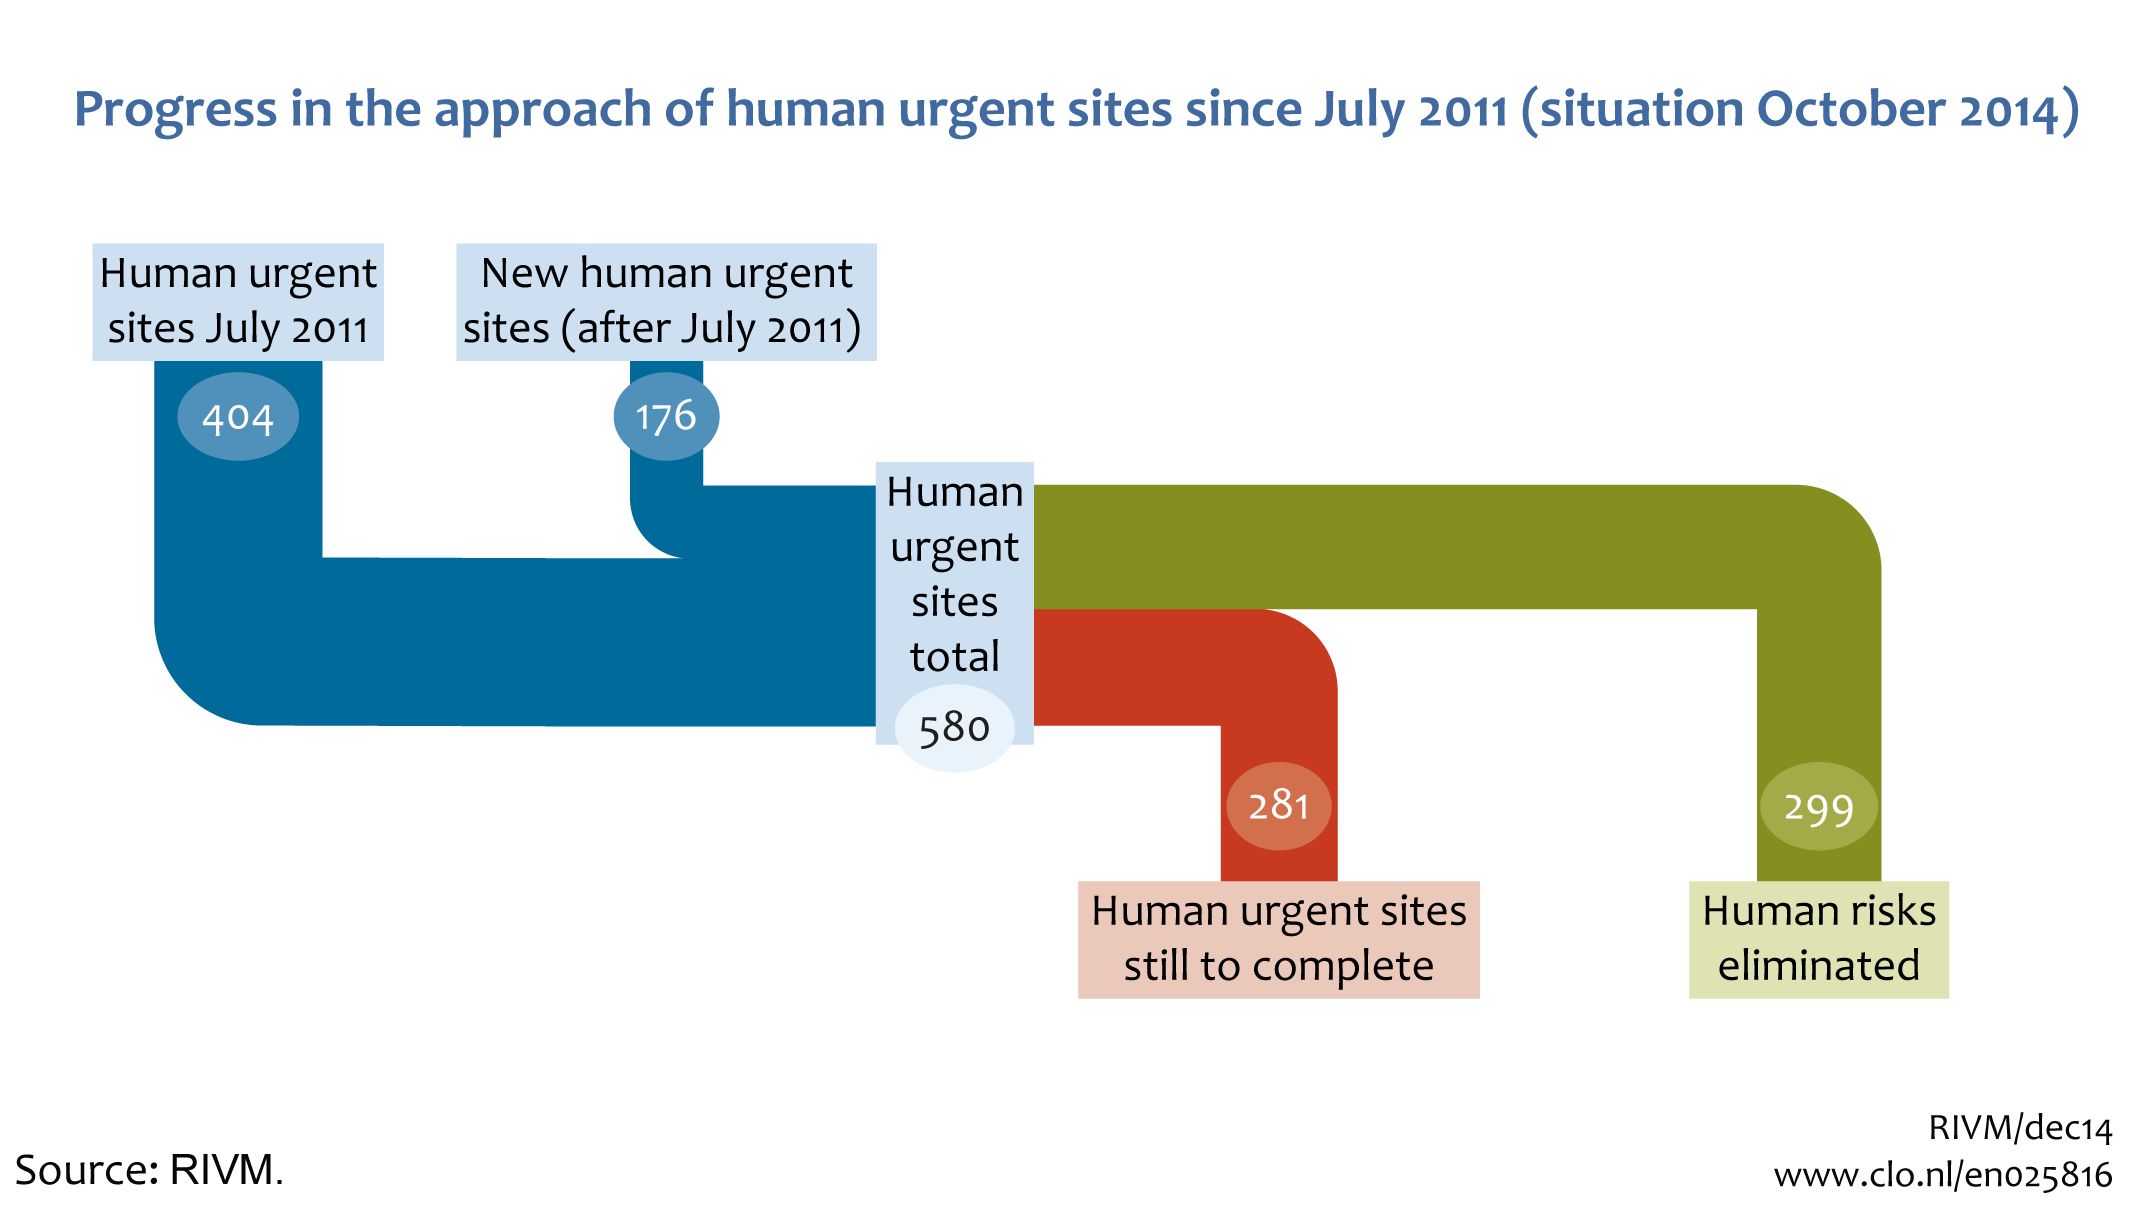 Image Progress in the approach of human urgent sites. The image is further explained in the text.